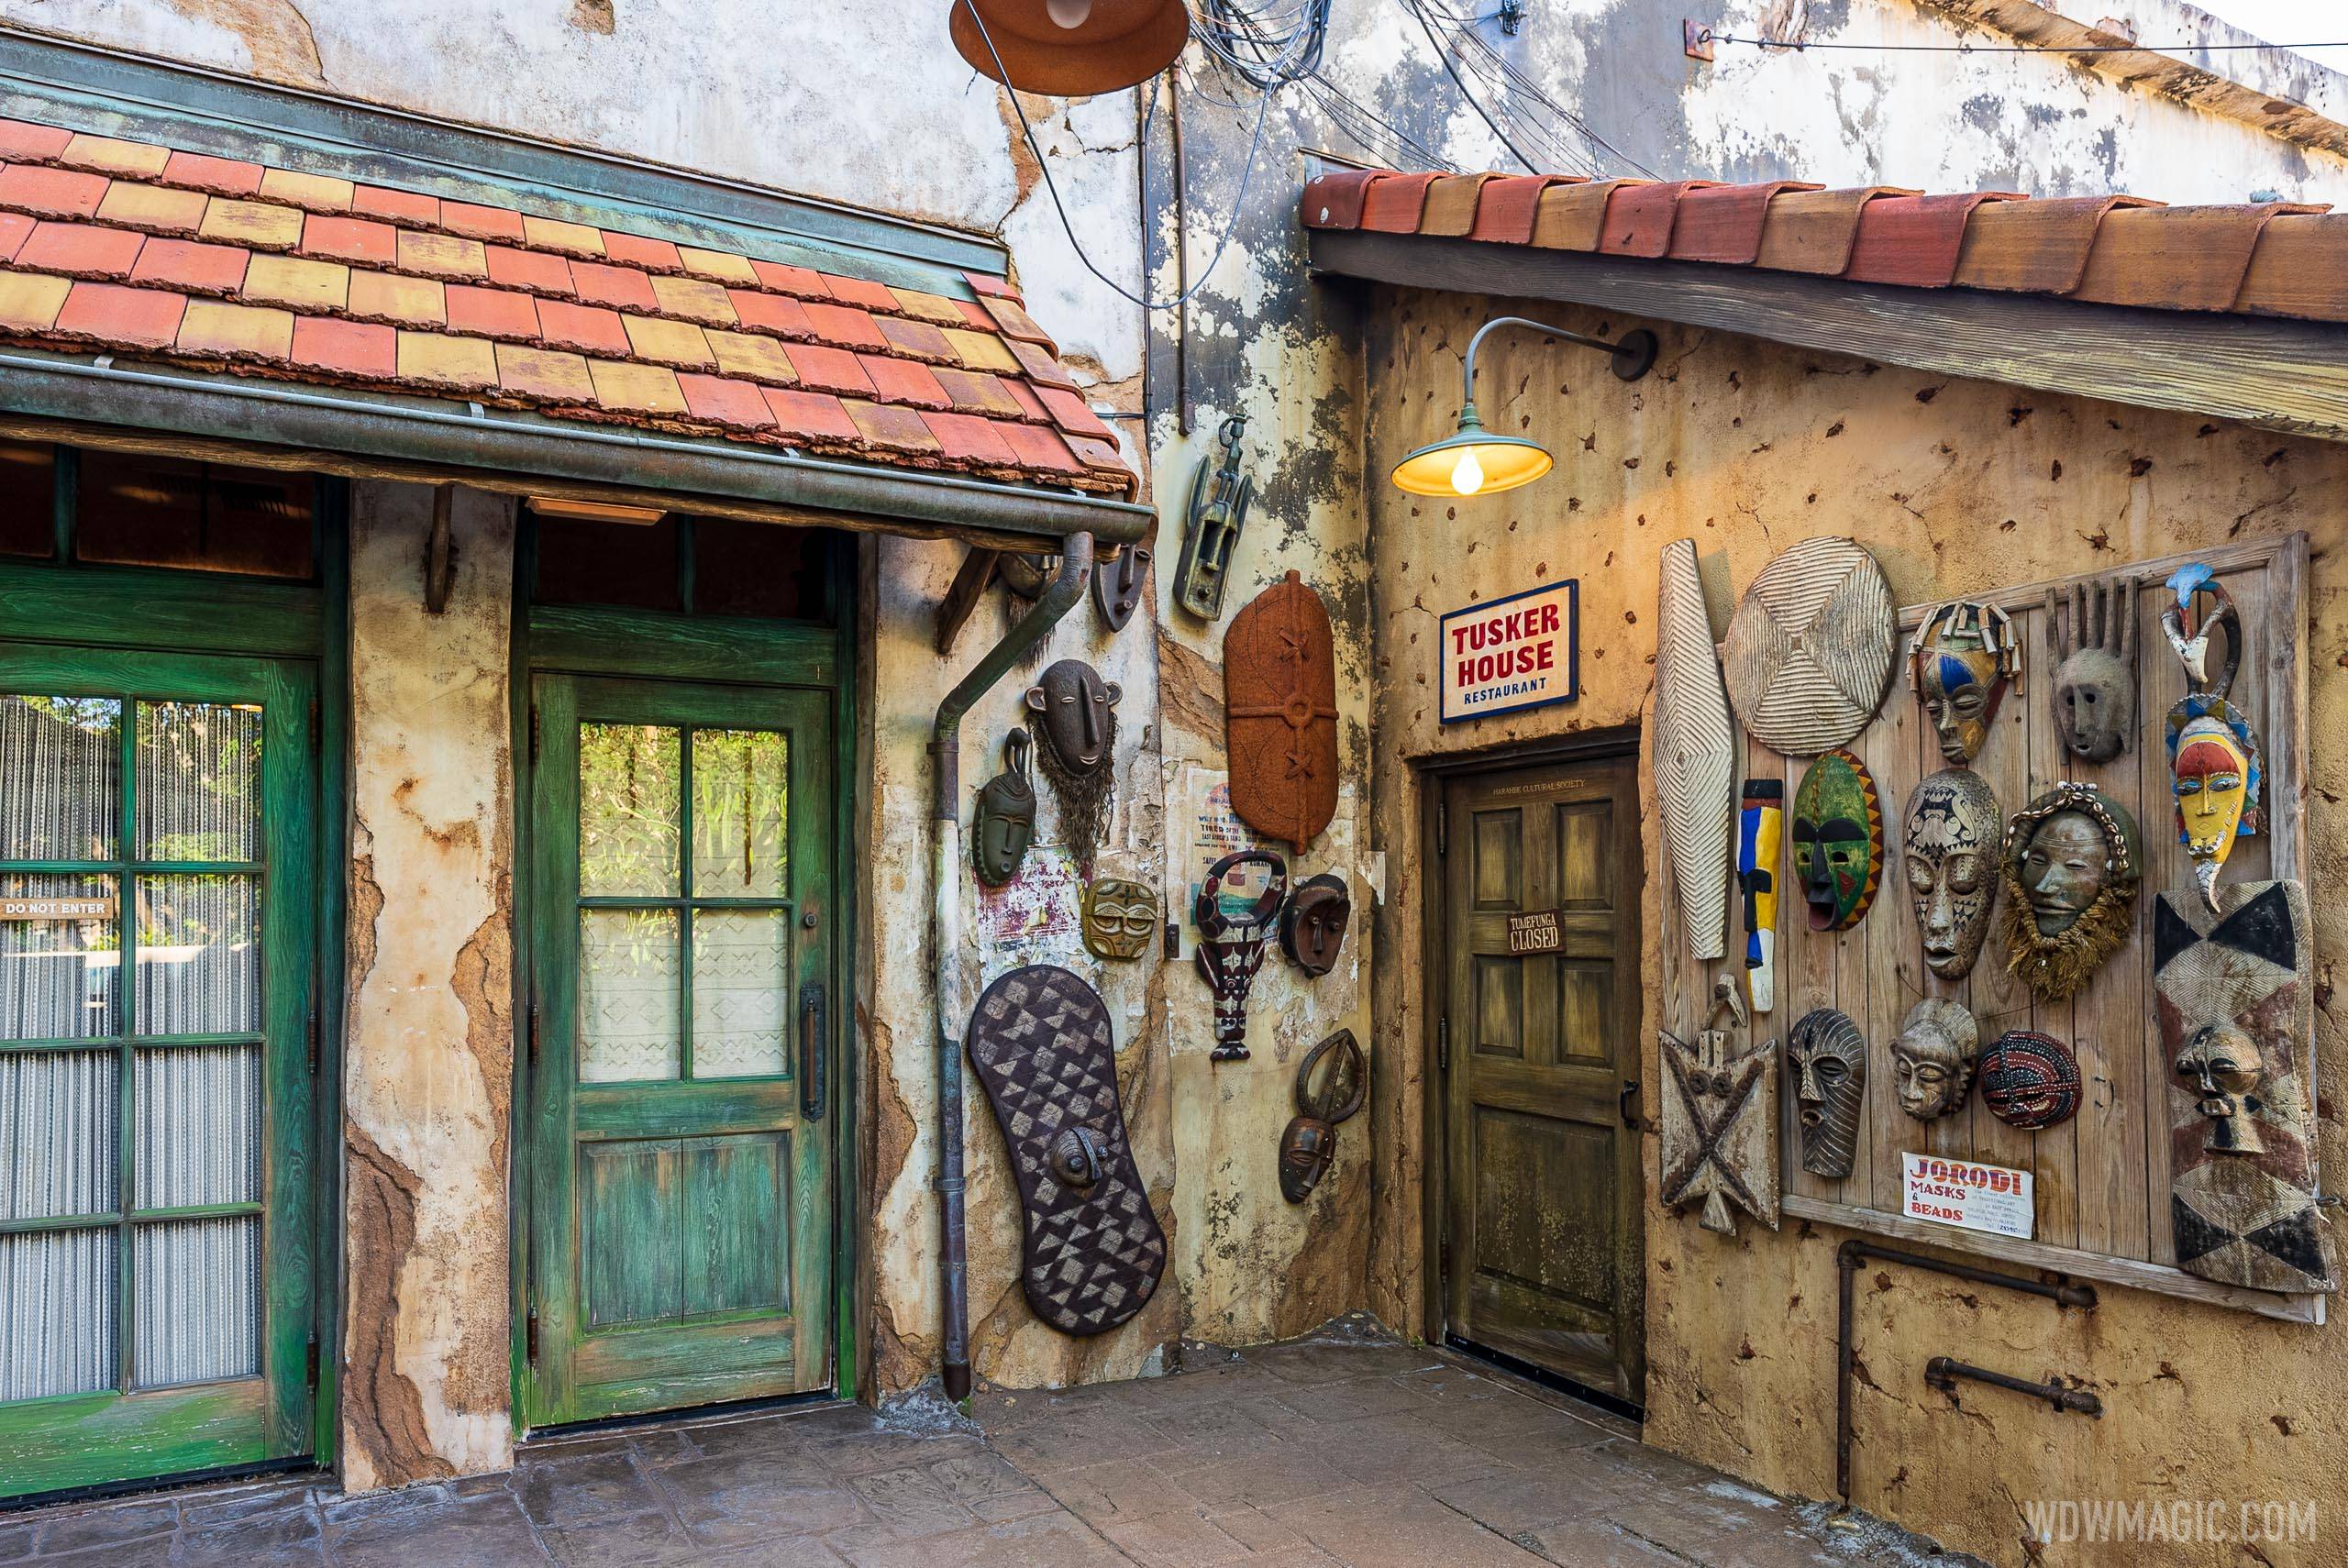 Tusker House at Disney's Animal Kingdom reopens later this month